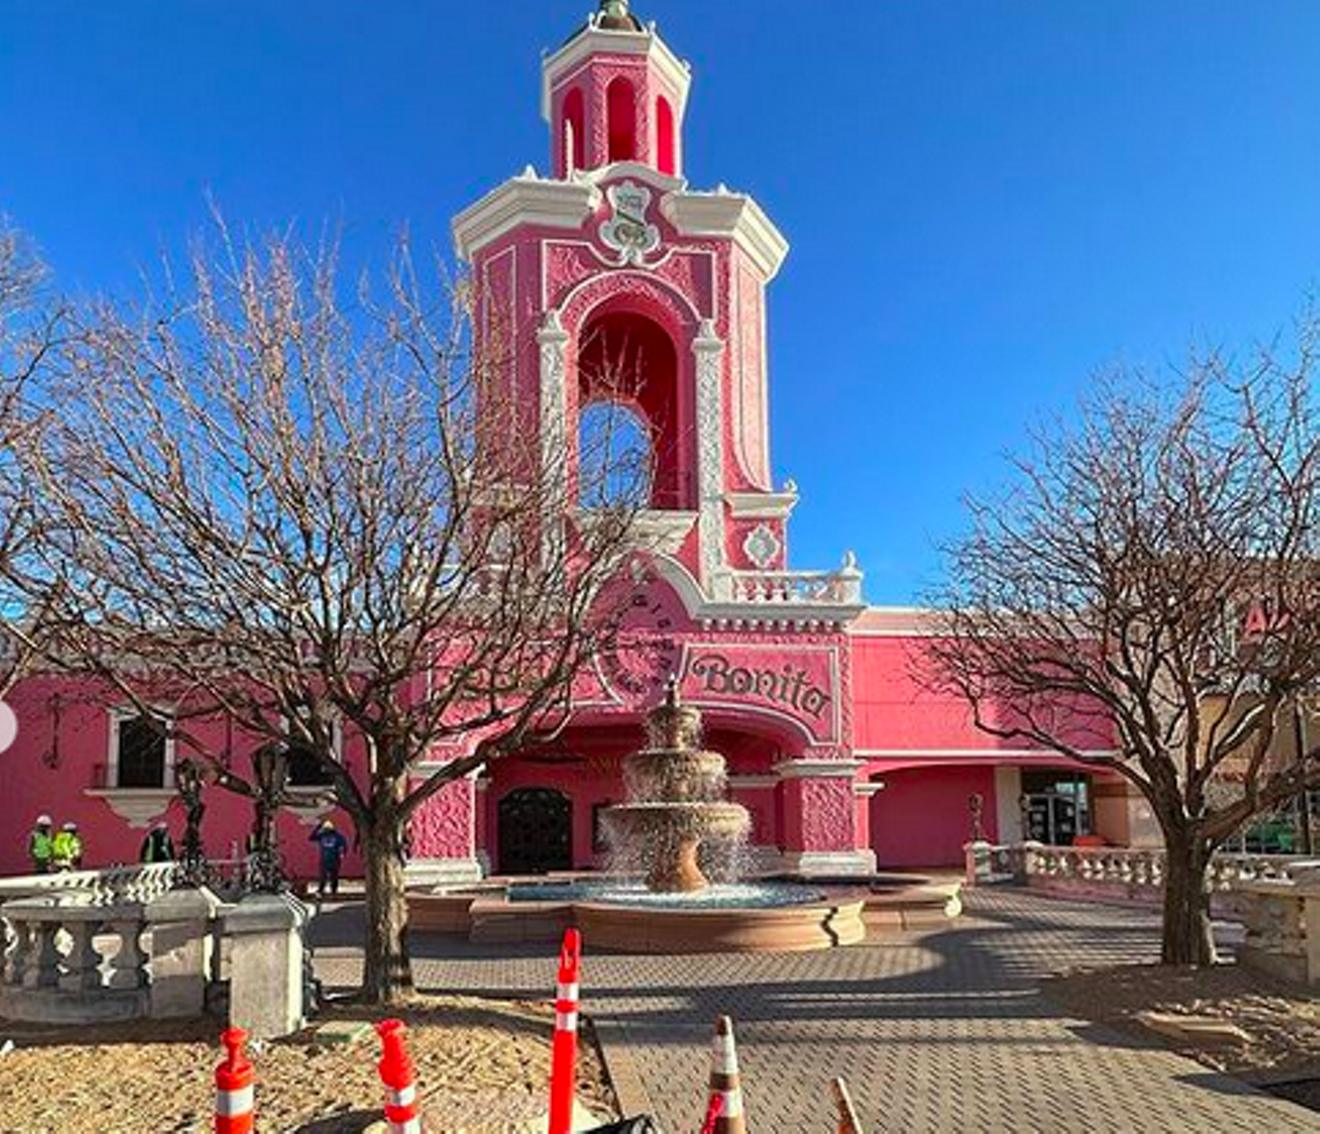 The fountain was back in action at Casa Bonita on March 24.